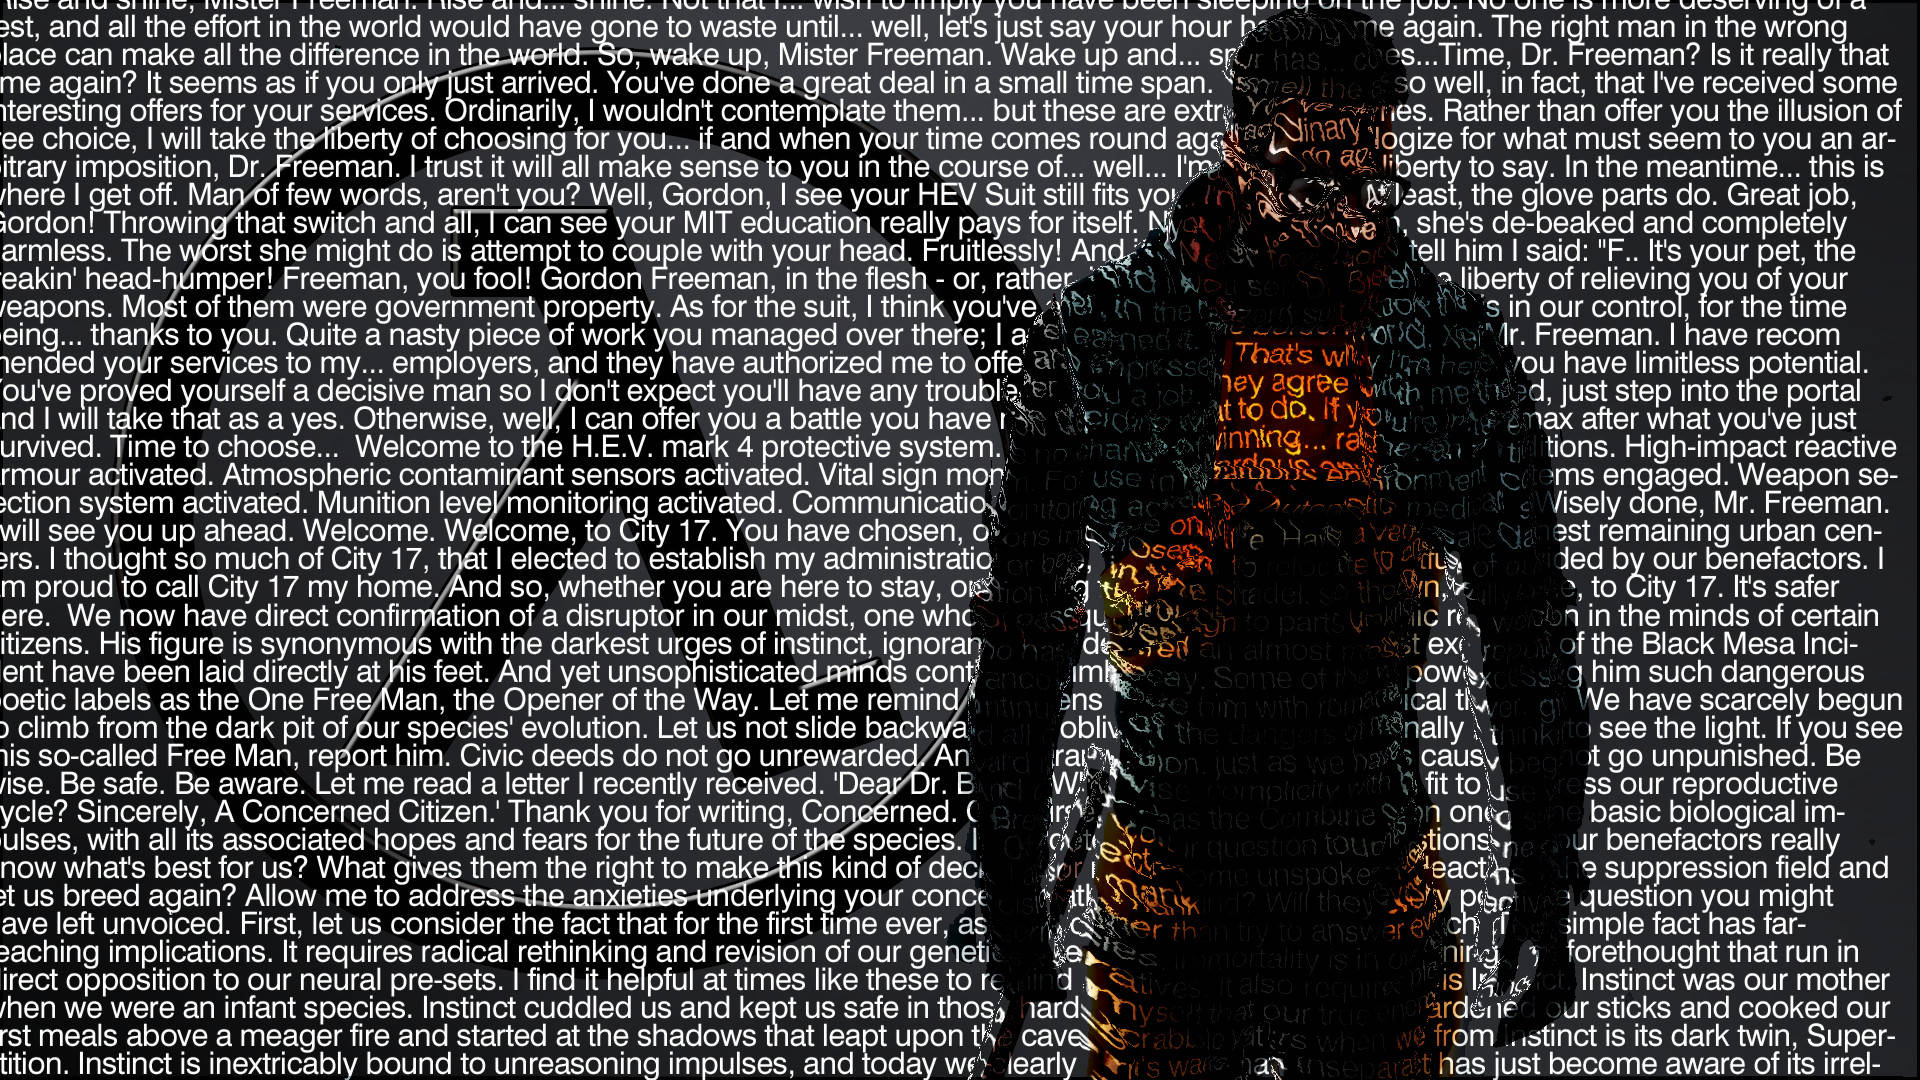 1920X1080 Half Life Wallpaper and Background